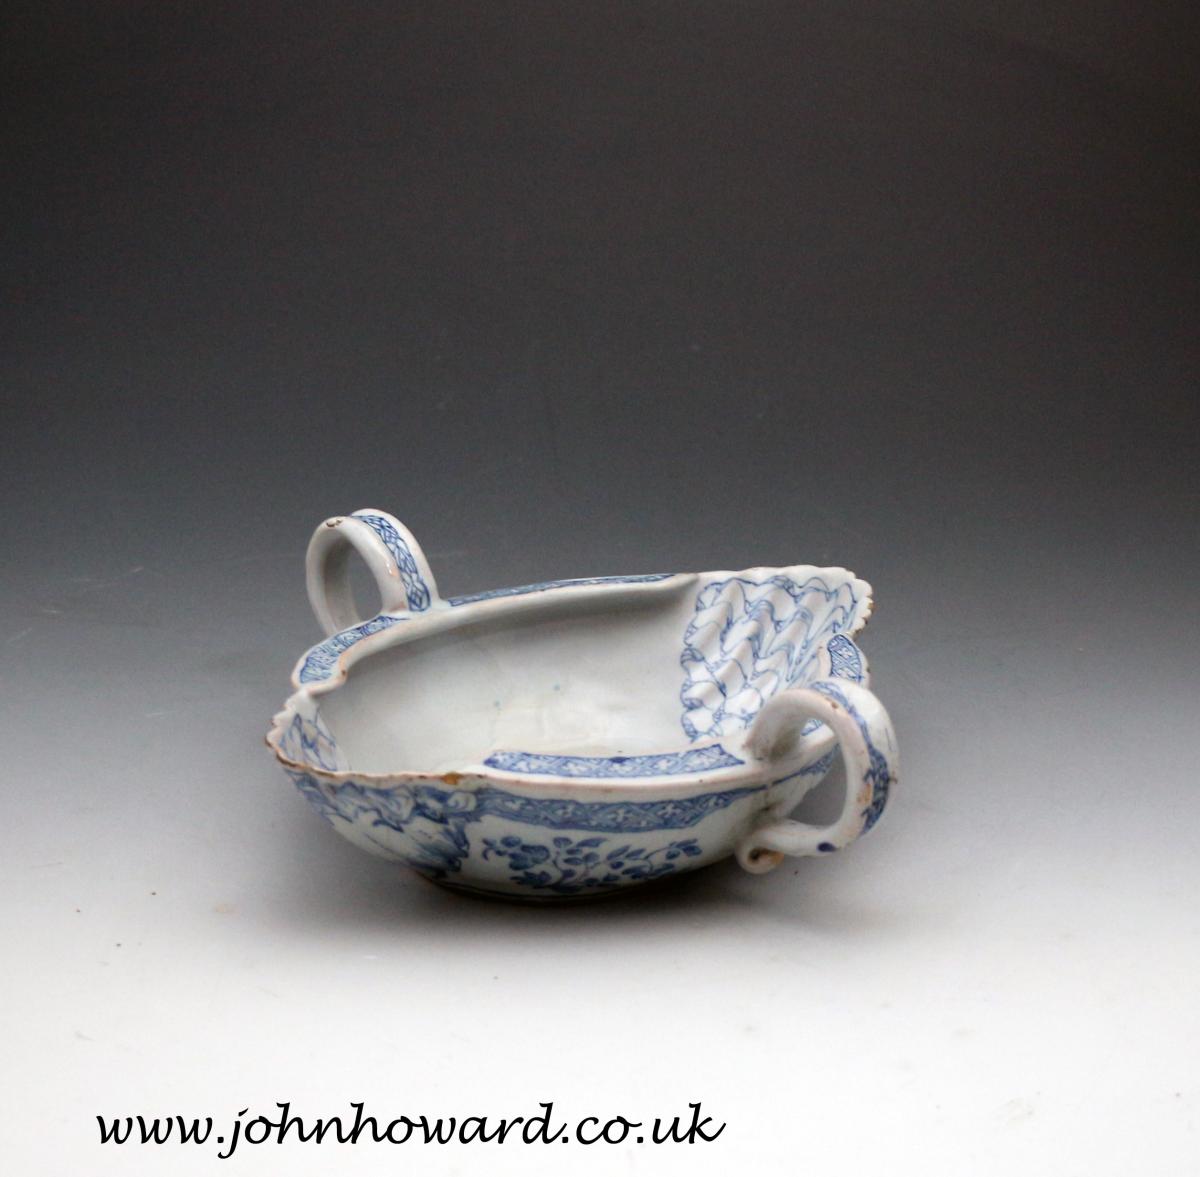 English delft pottery sauce-boat attributed Liverpool mid 18th century